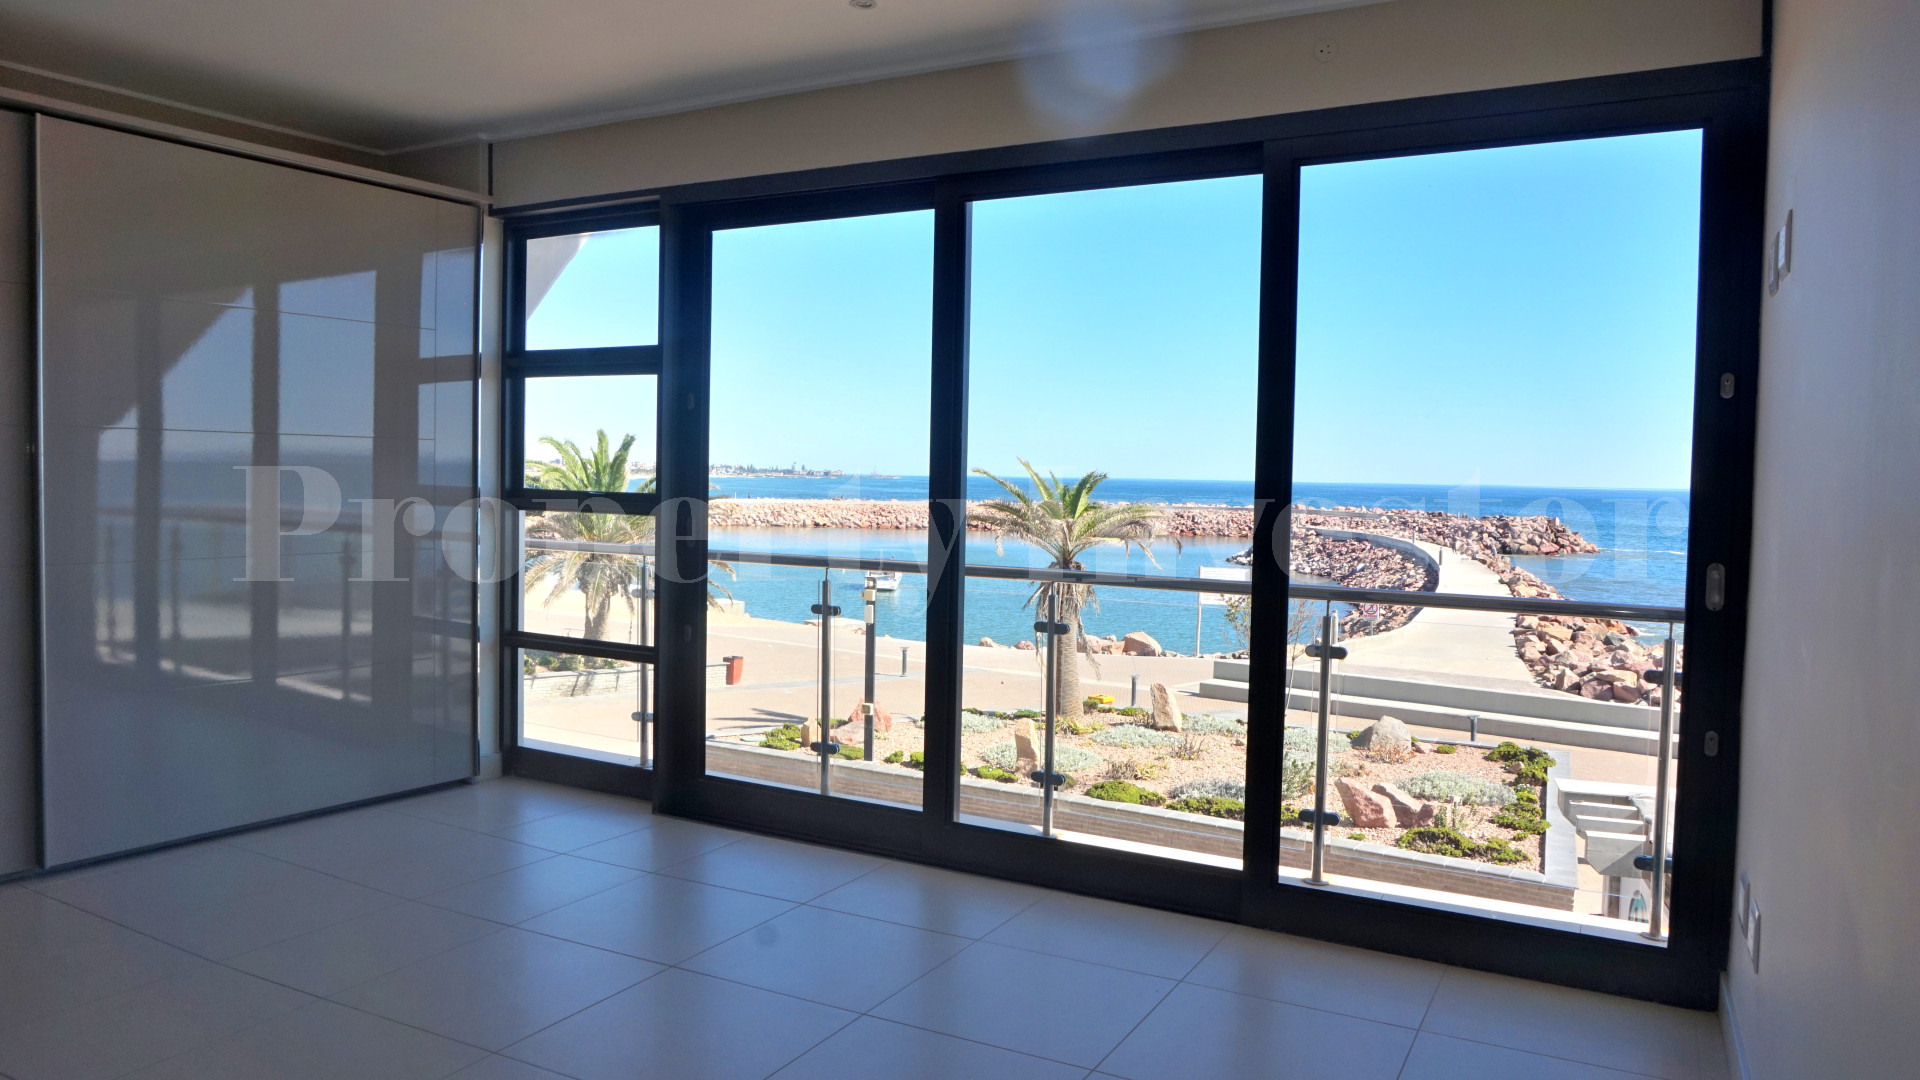 Exclusive 4 Bedroom Luxury Waterfront Penthouse with Spectacular Ocean Views & Balconies for Sale in Swakopmund, Namibia